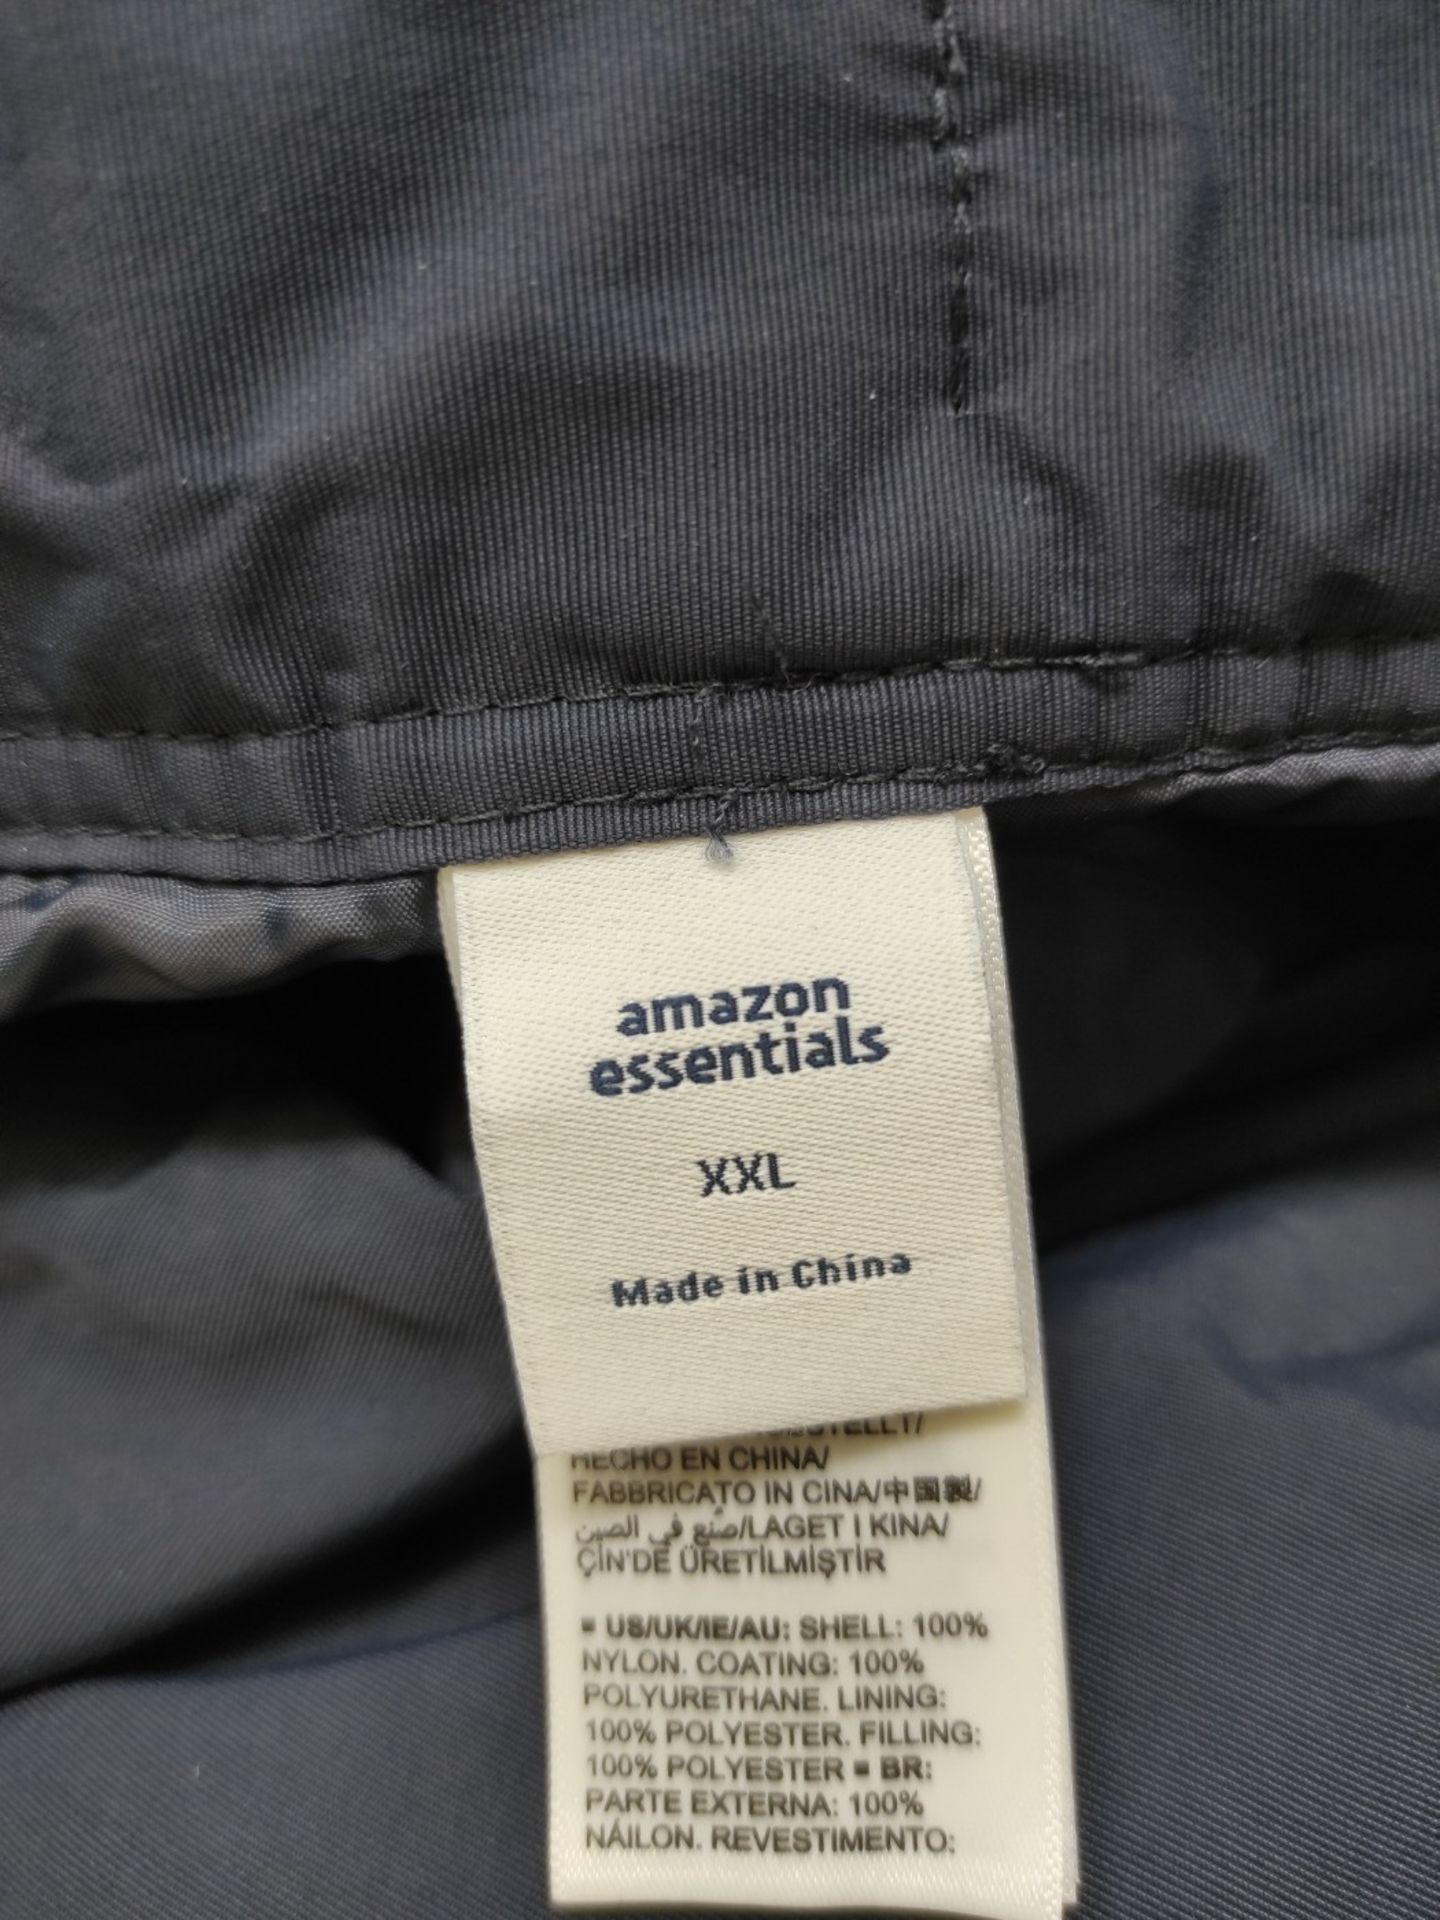 Amazon Essentials Insulated and Water-Resistant Men's Ski Pants, Navy Blue, XXL - Image 3 of 3